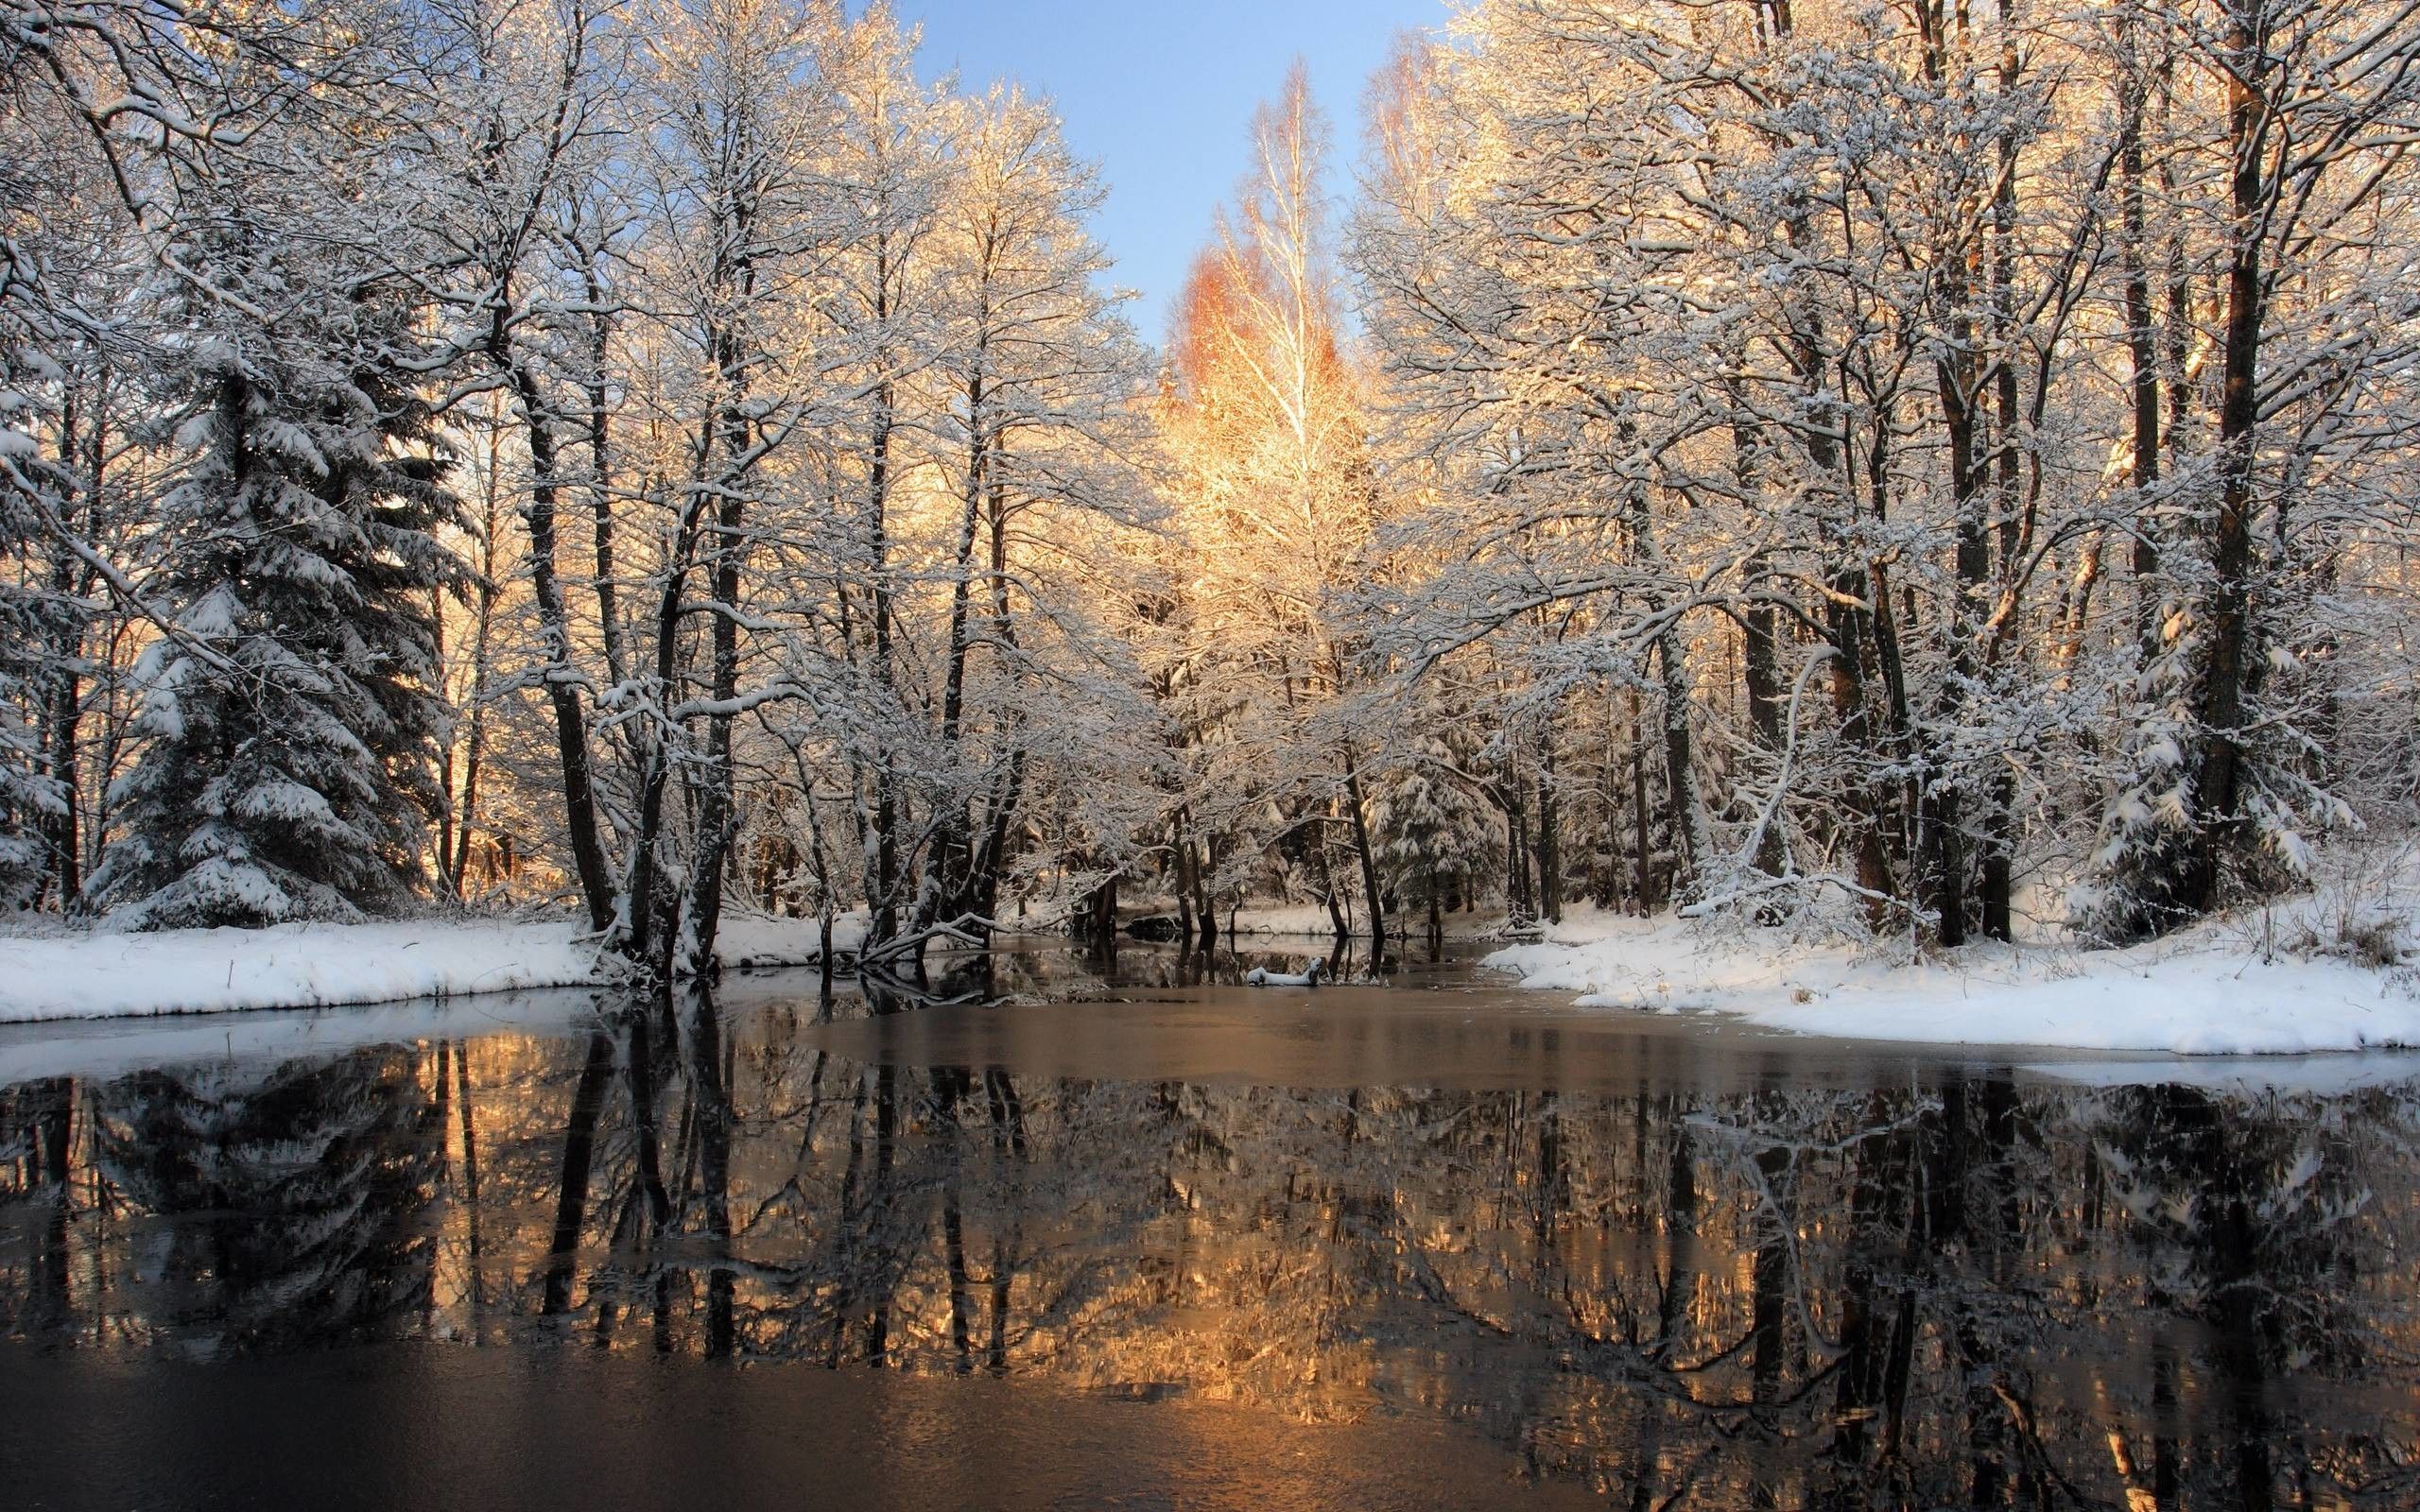 Winter Nature Wallpapers   Top Free Winter Nature Backgrounds